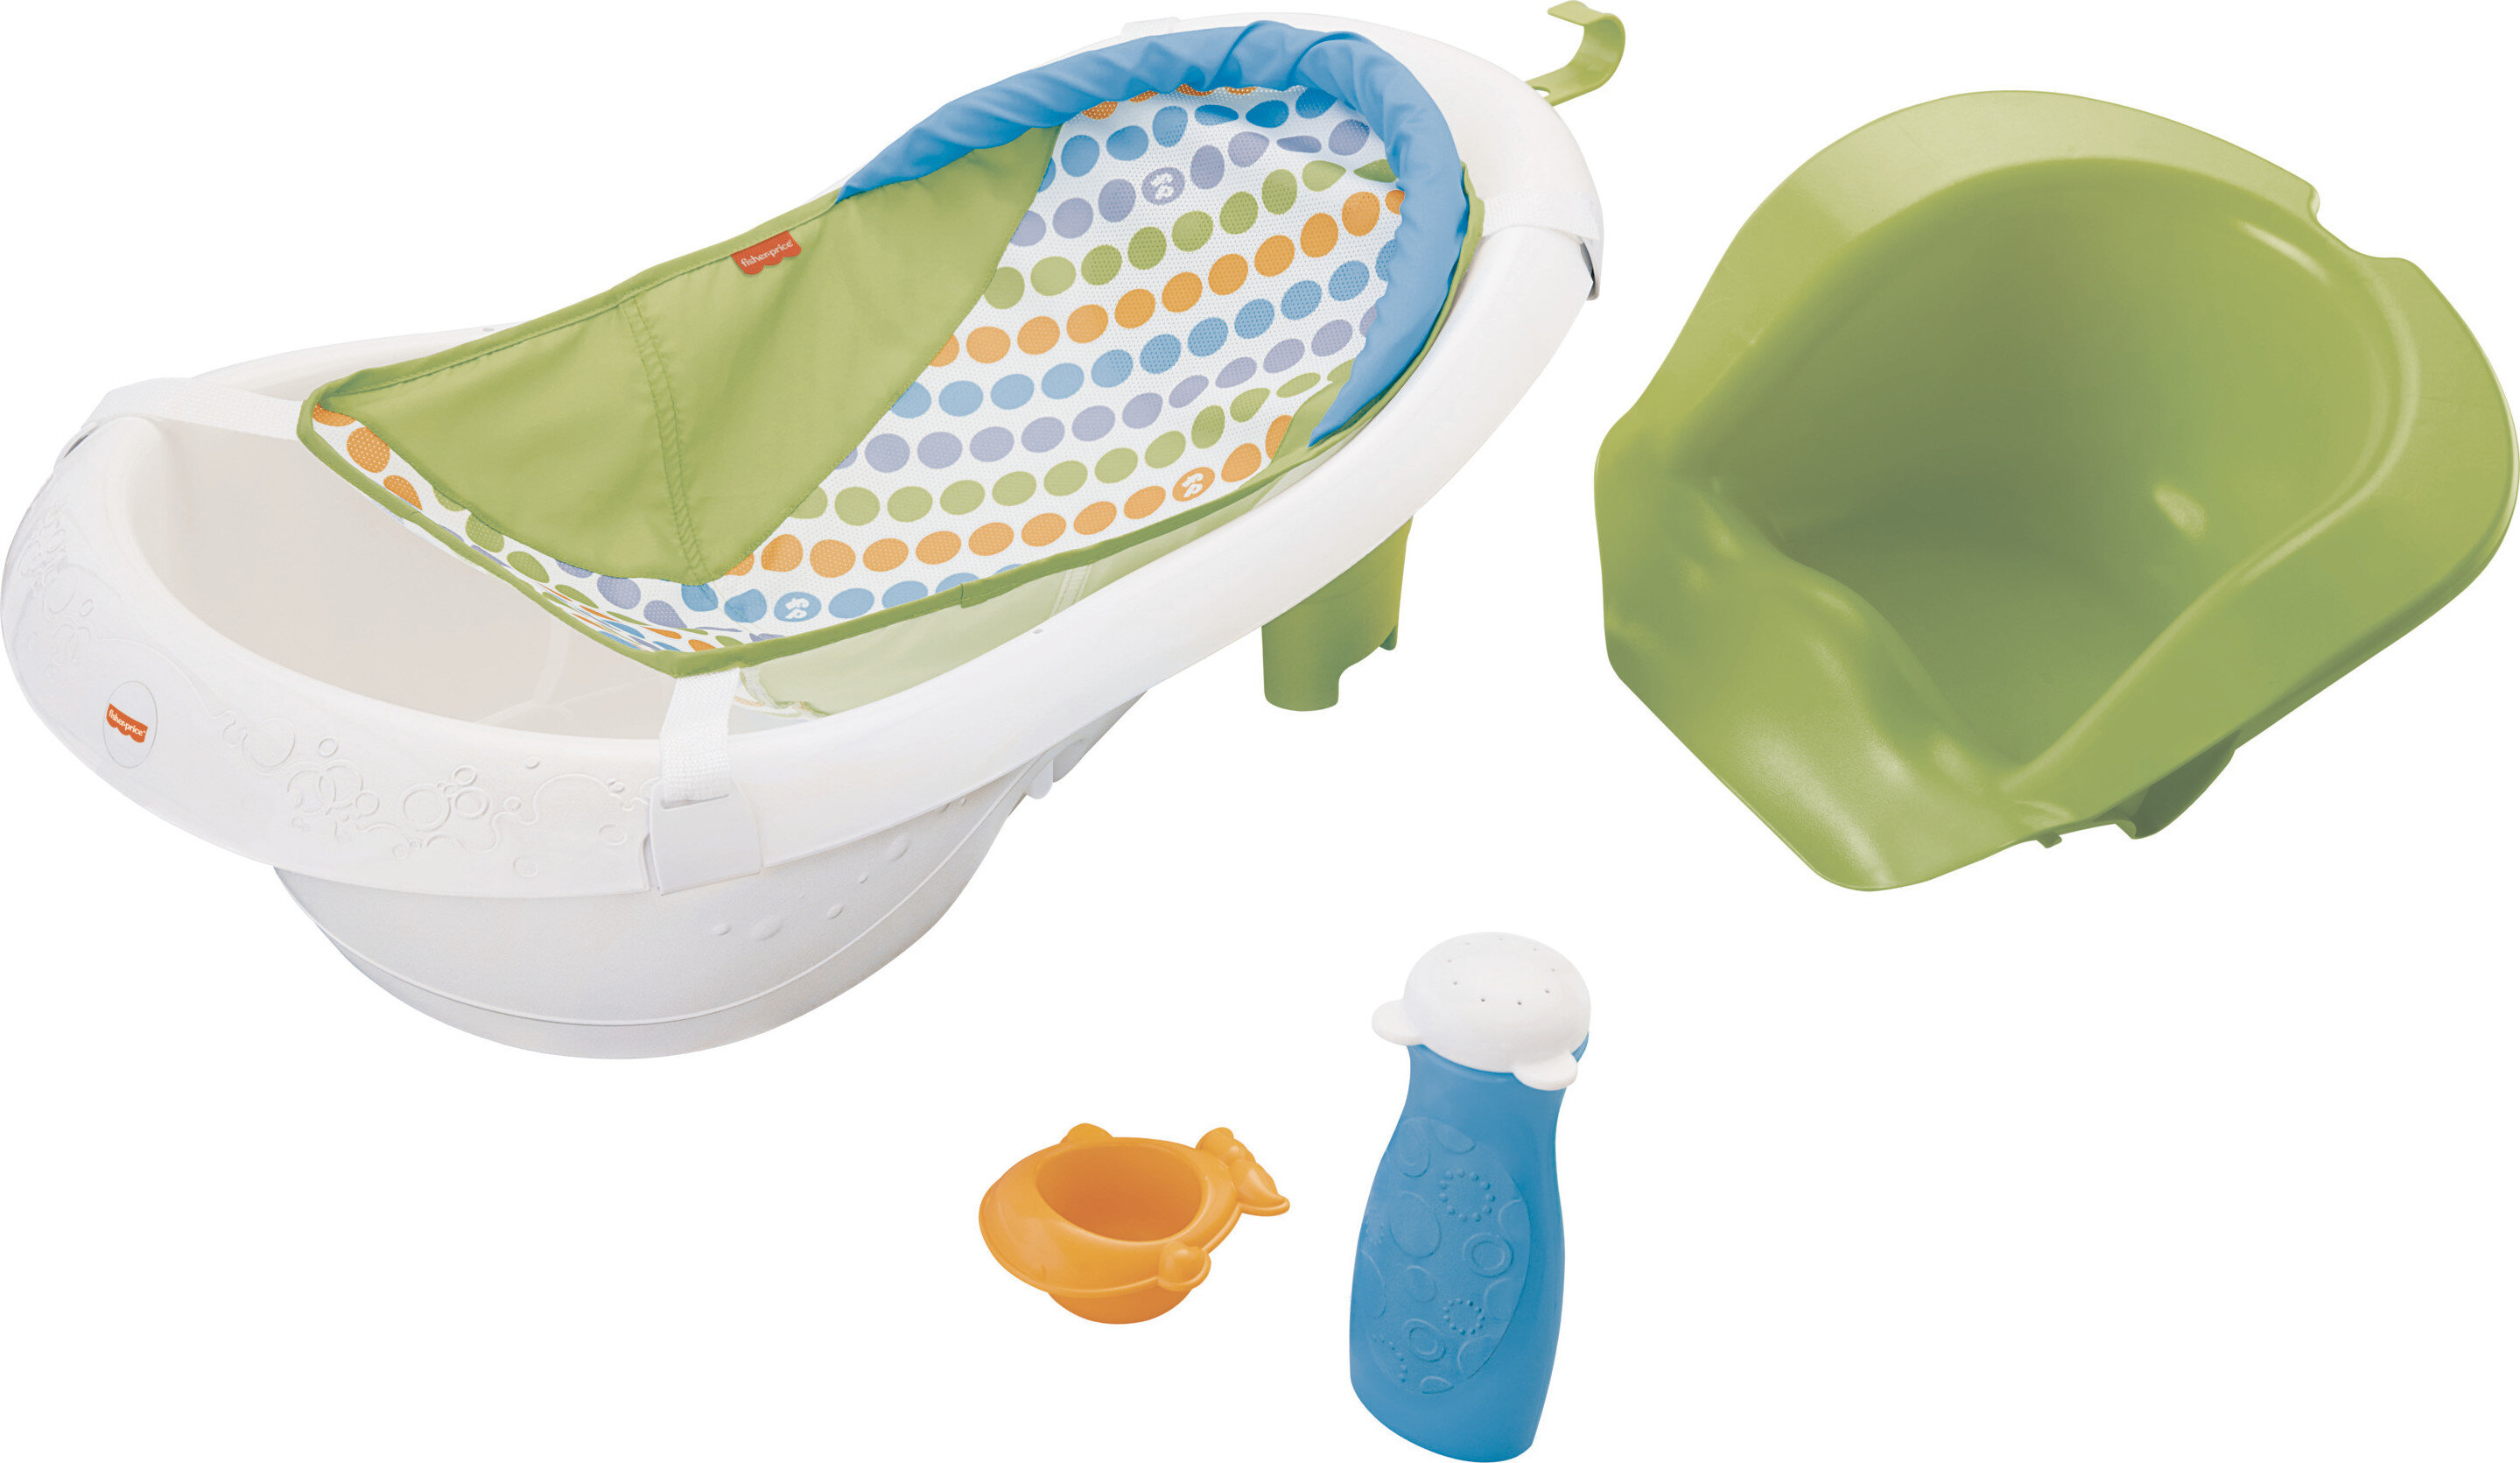 Fisher-Price 4-in-1 Sling ‘n Seat Tub Adjustable Baby Bath for Infant to Toddler with 2 Toys, Unisex - image 1 of 7